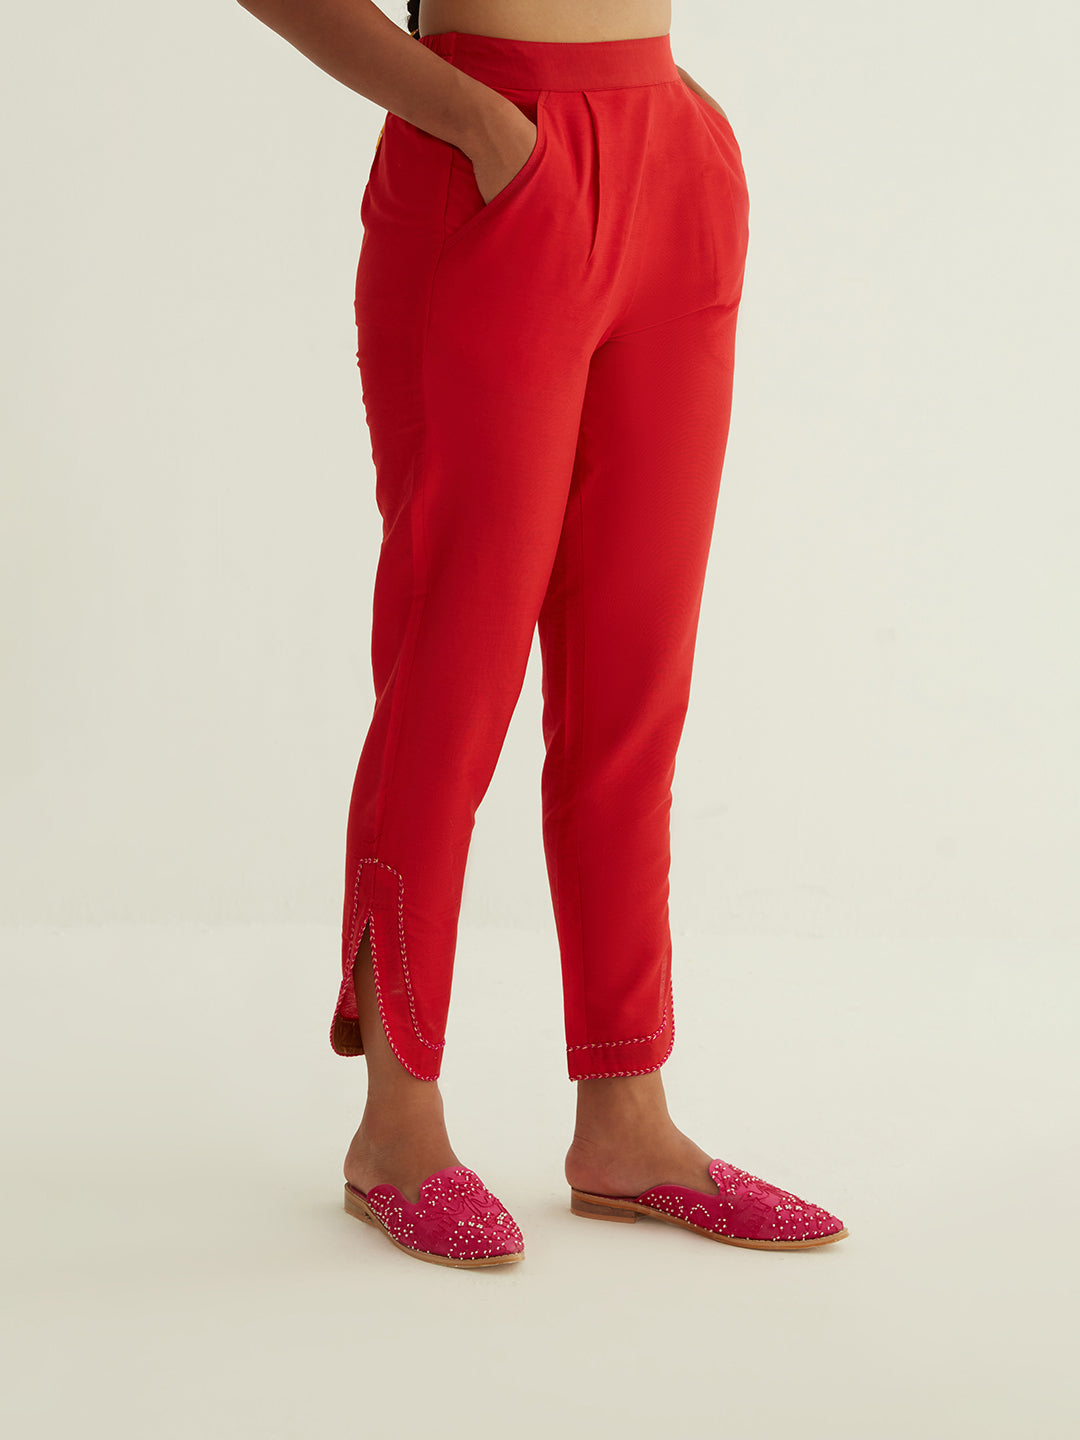 Curved hem pants highlighted with lace